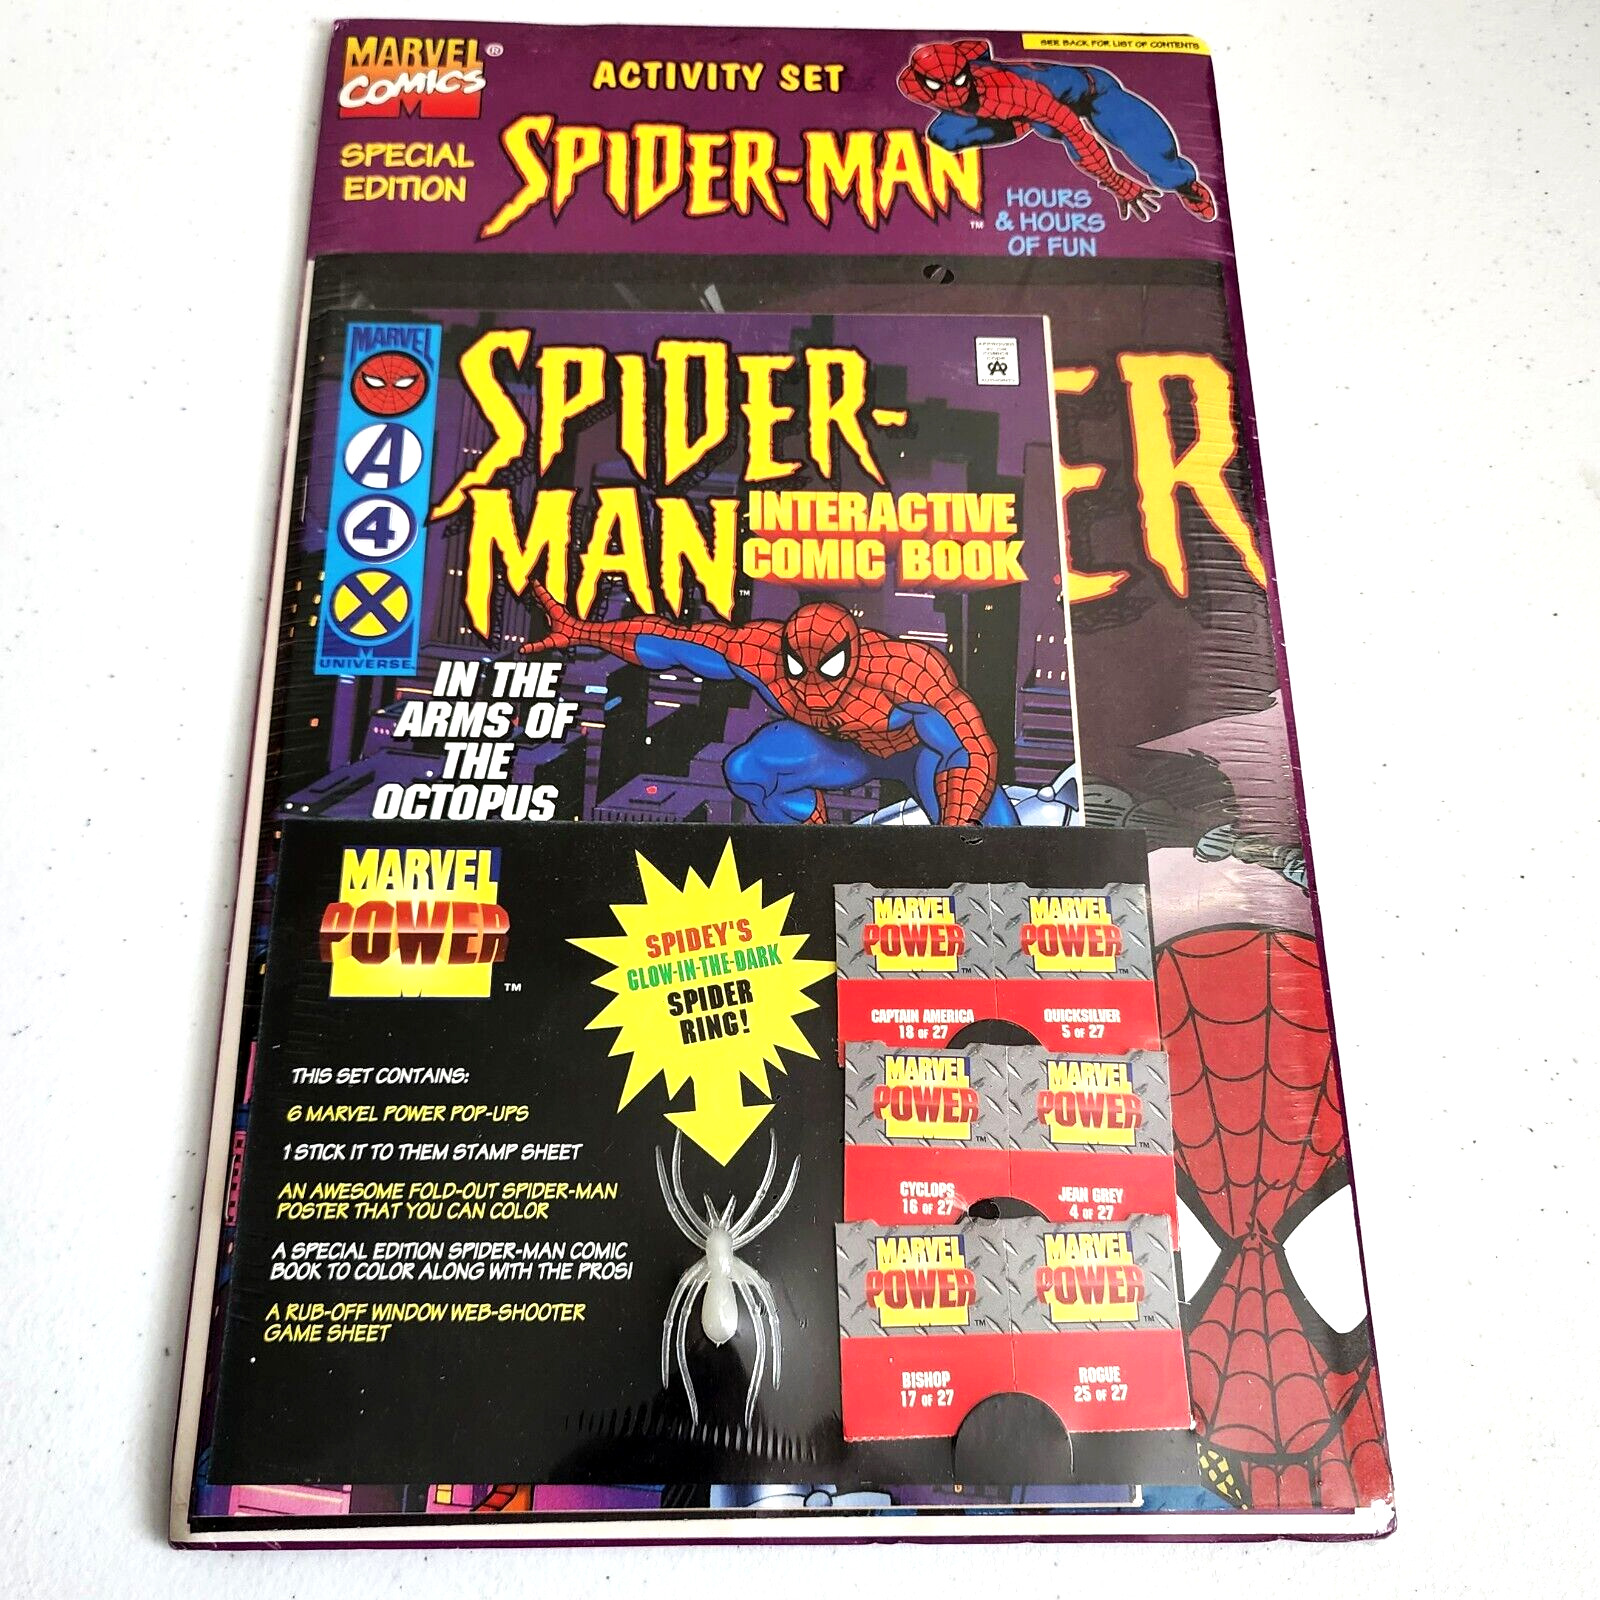 Marvel Spider-Man Interactive Comic Book Special Edition Activity Set SEALED